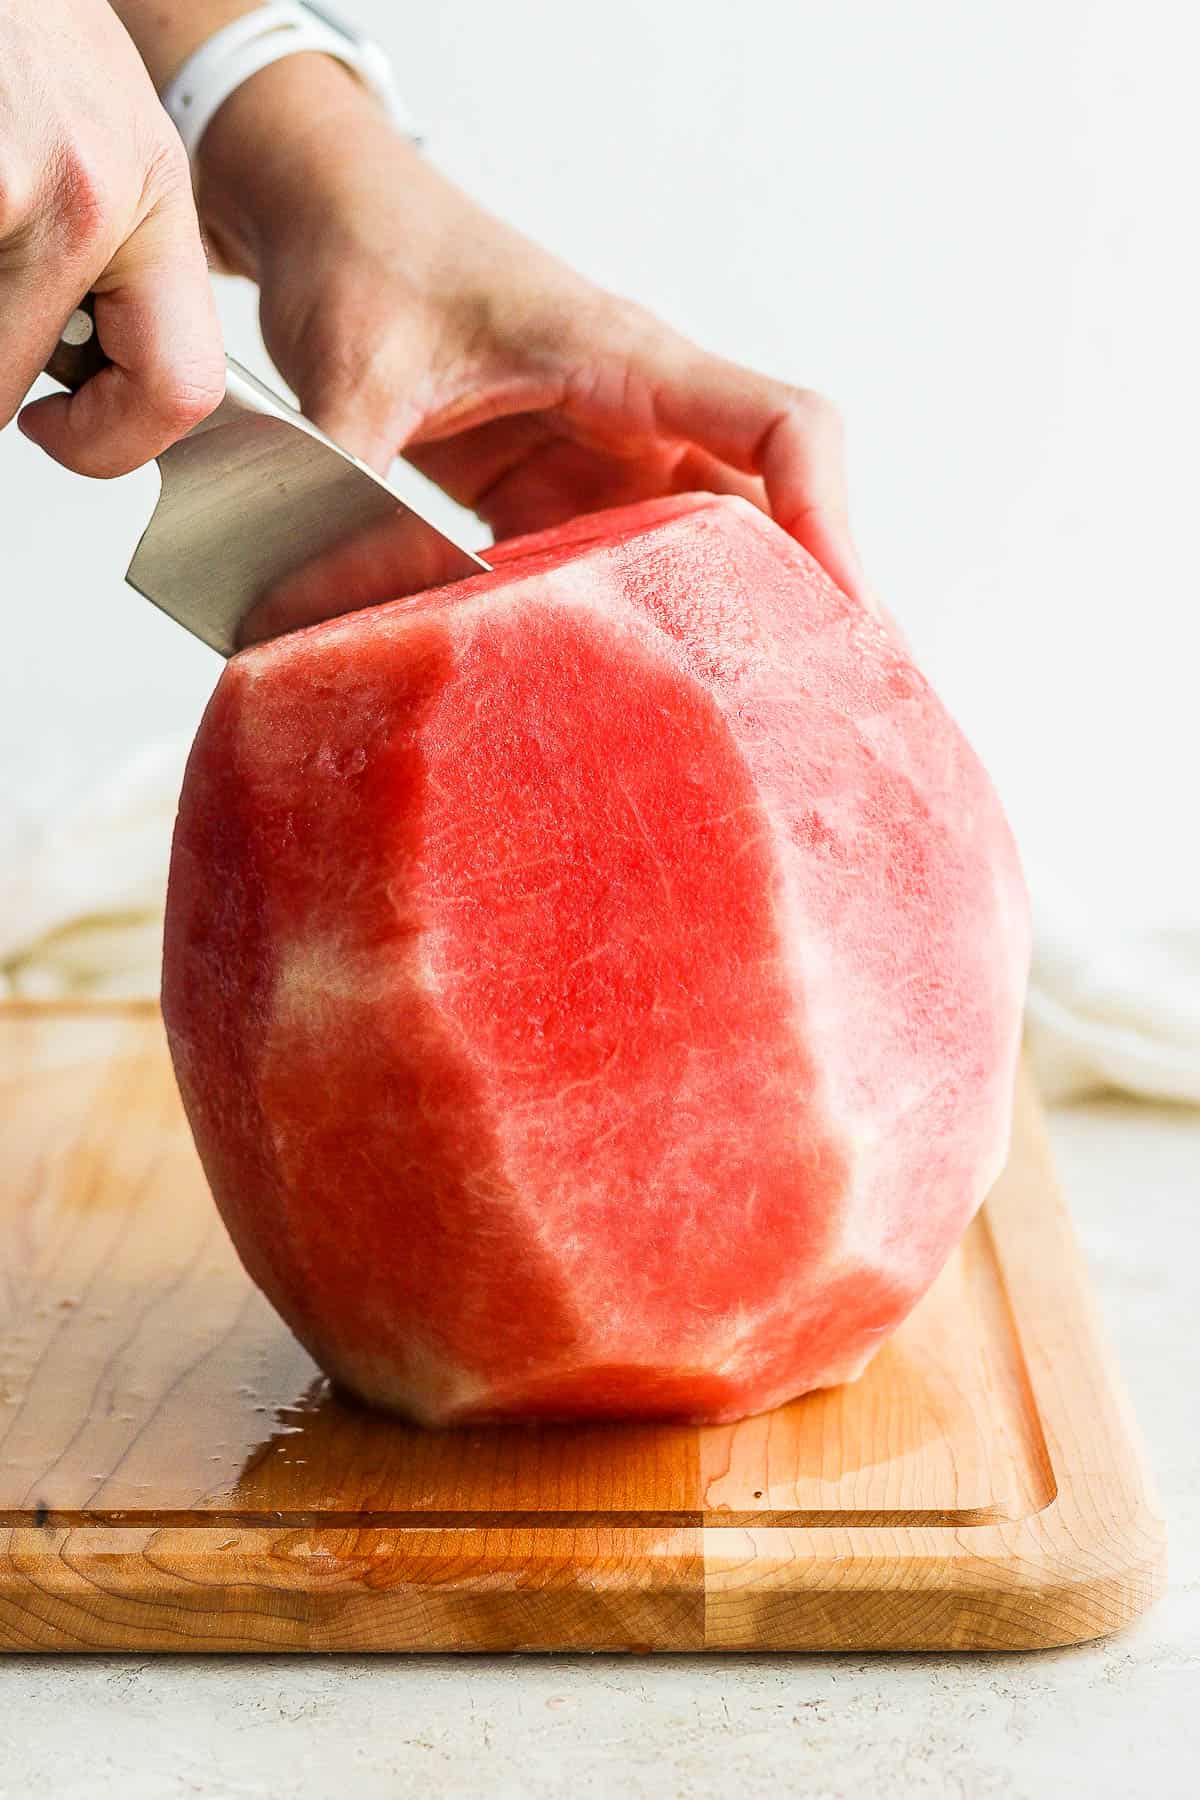 Watermelon, with the rind cut off, being cut in half.